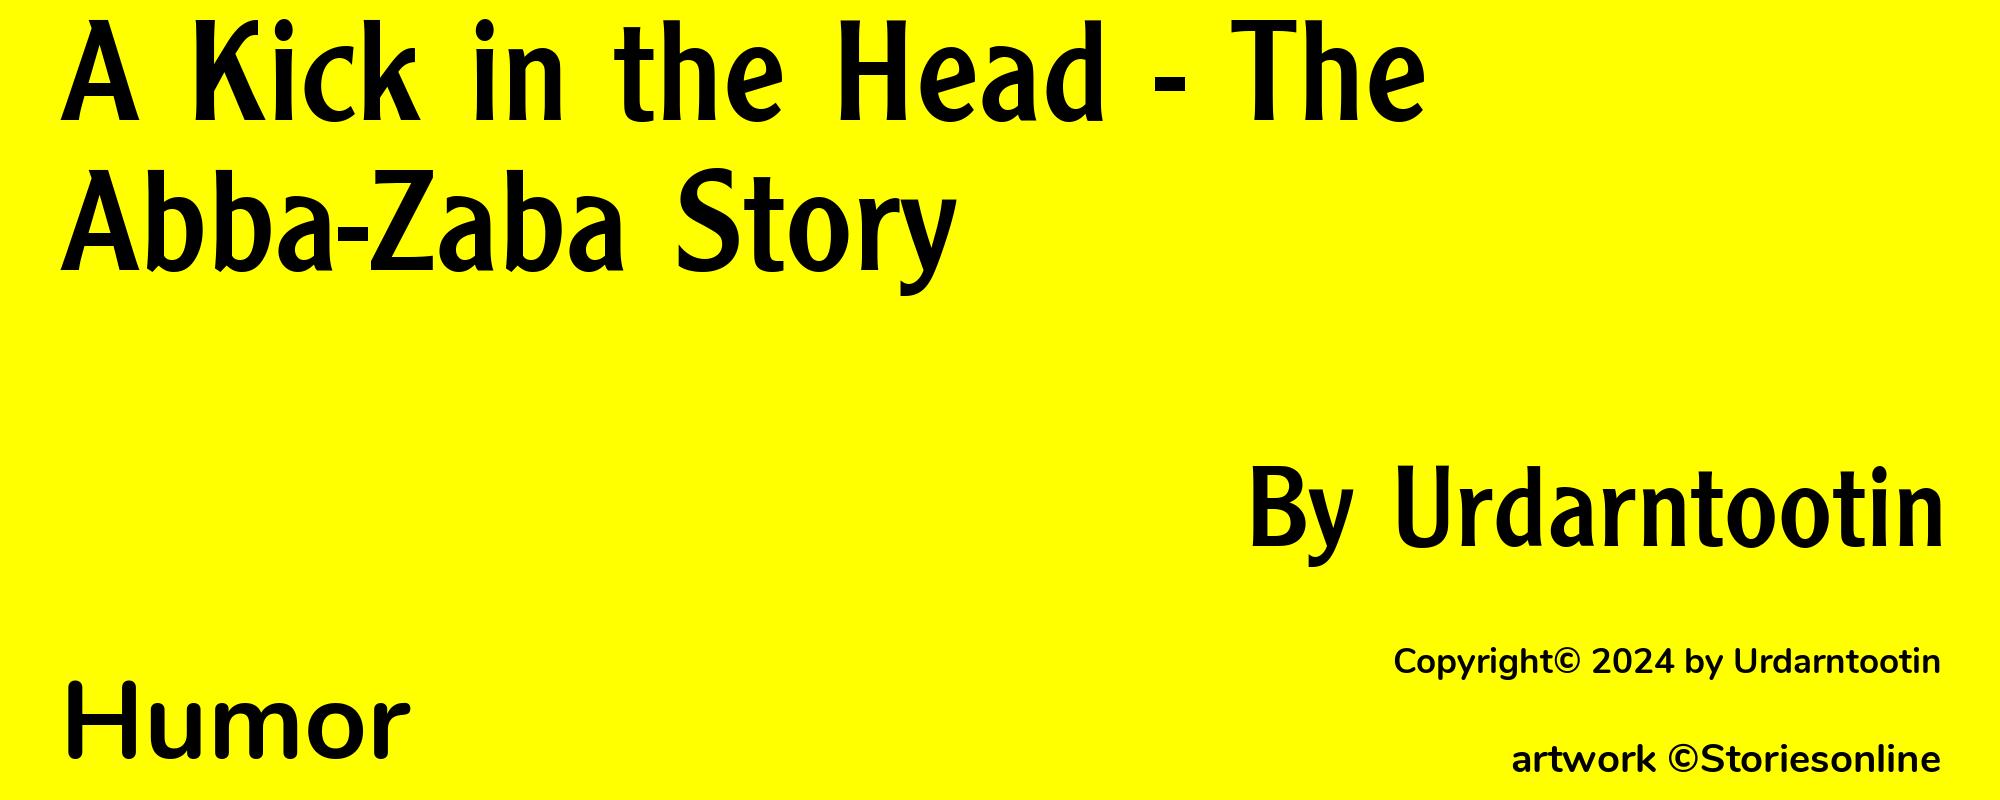 A Kick in the Head - The Abba-Zaba Story - Cover